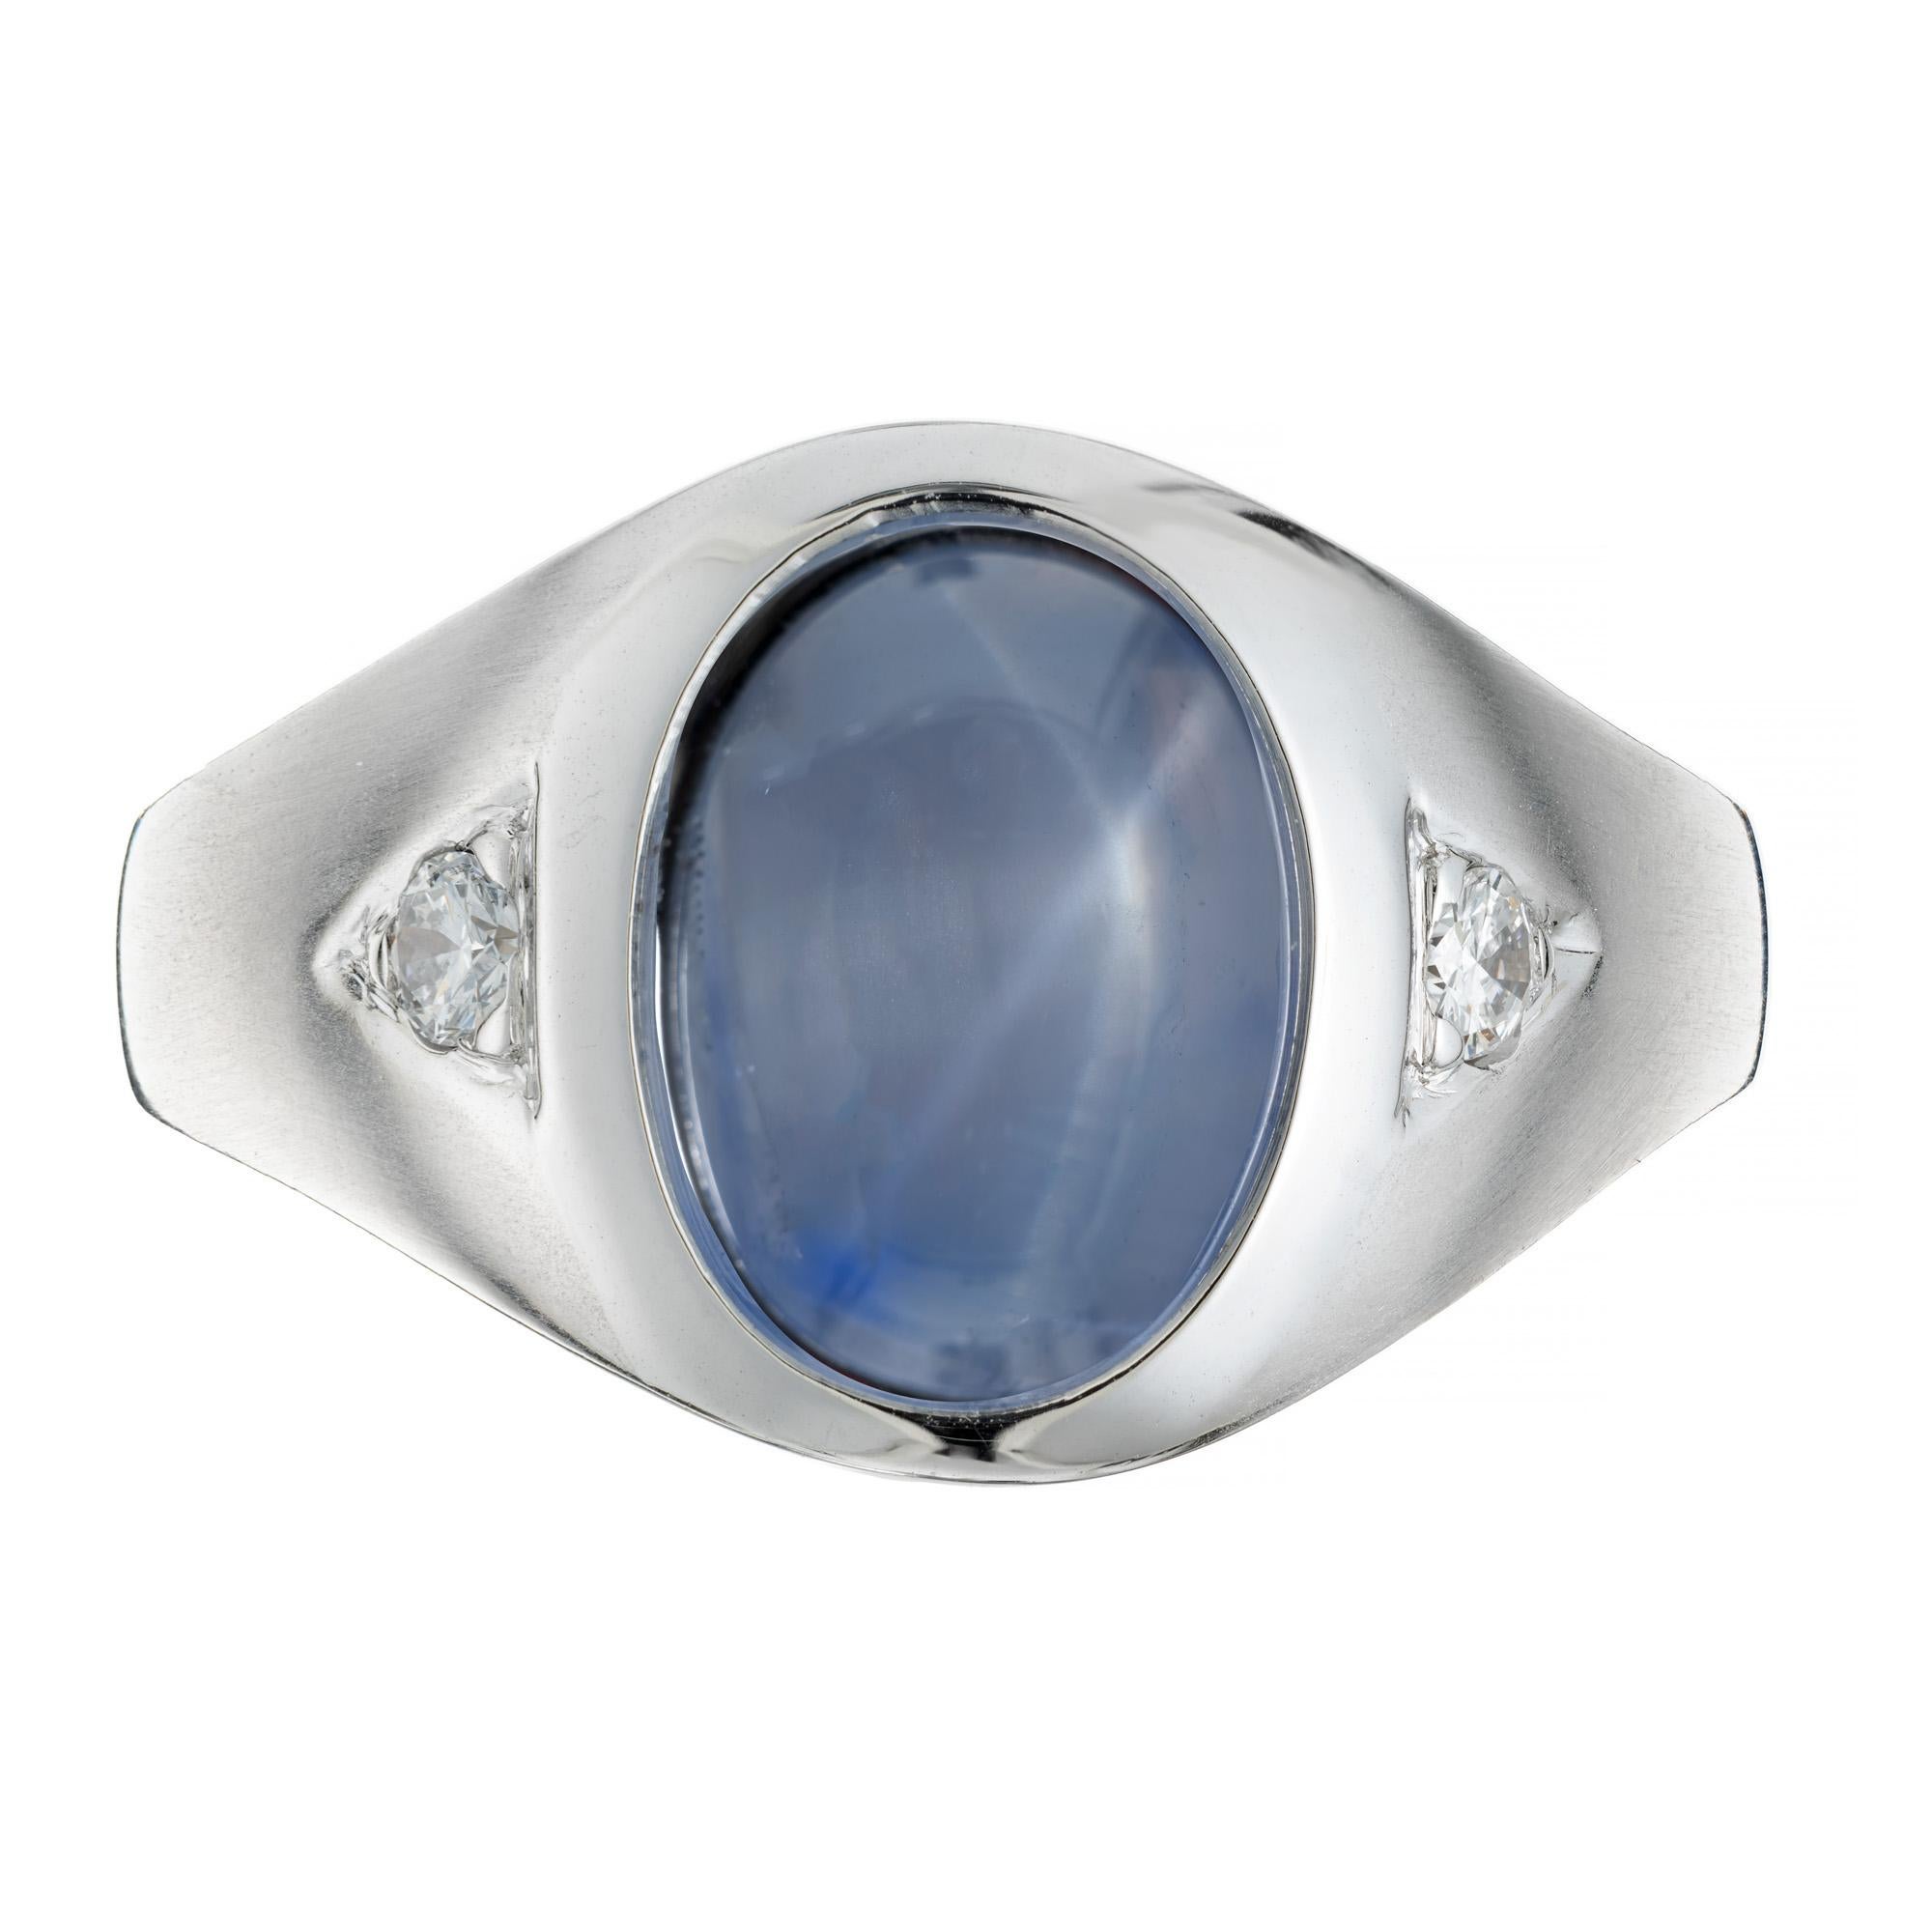 1940's Sapphire and diamond men's ring. This GIA certified natural no heat, beautiful oval cabochon star sapphire is an impressive 11.11cts., with rich blue and gray color zoning. Mounted in a 14k white gold brushed textured setting with one accent